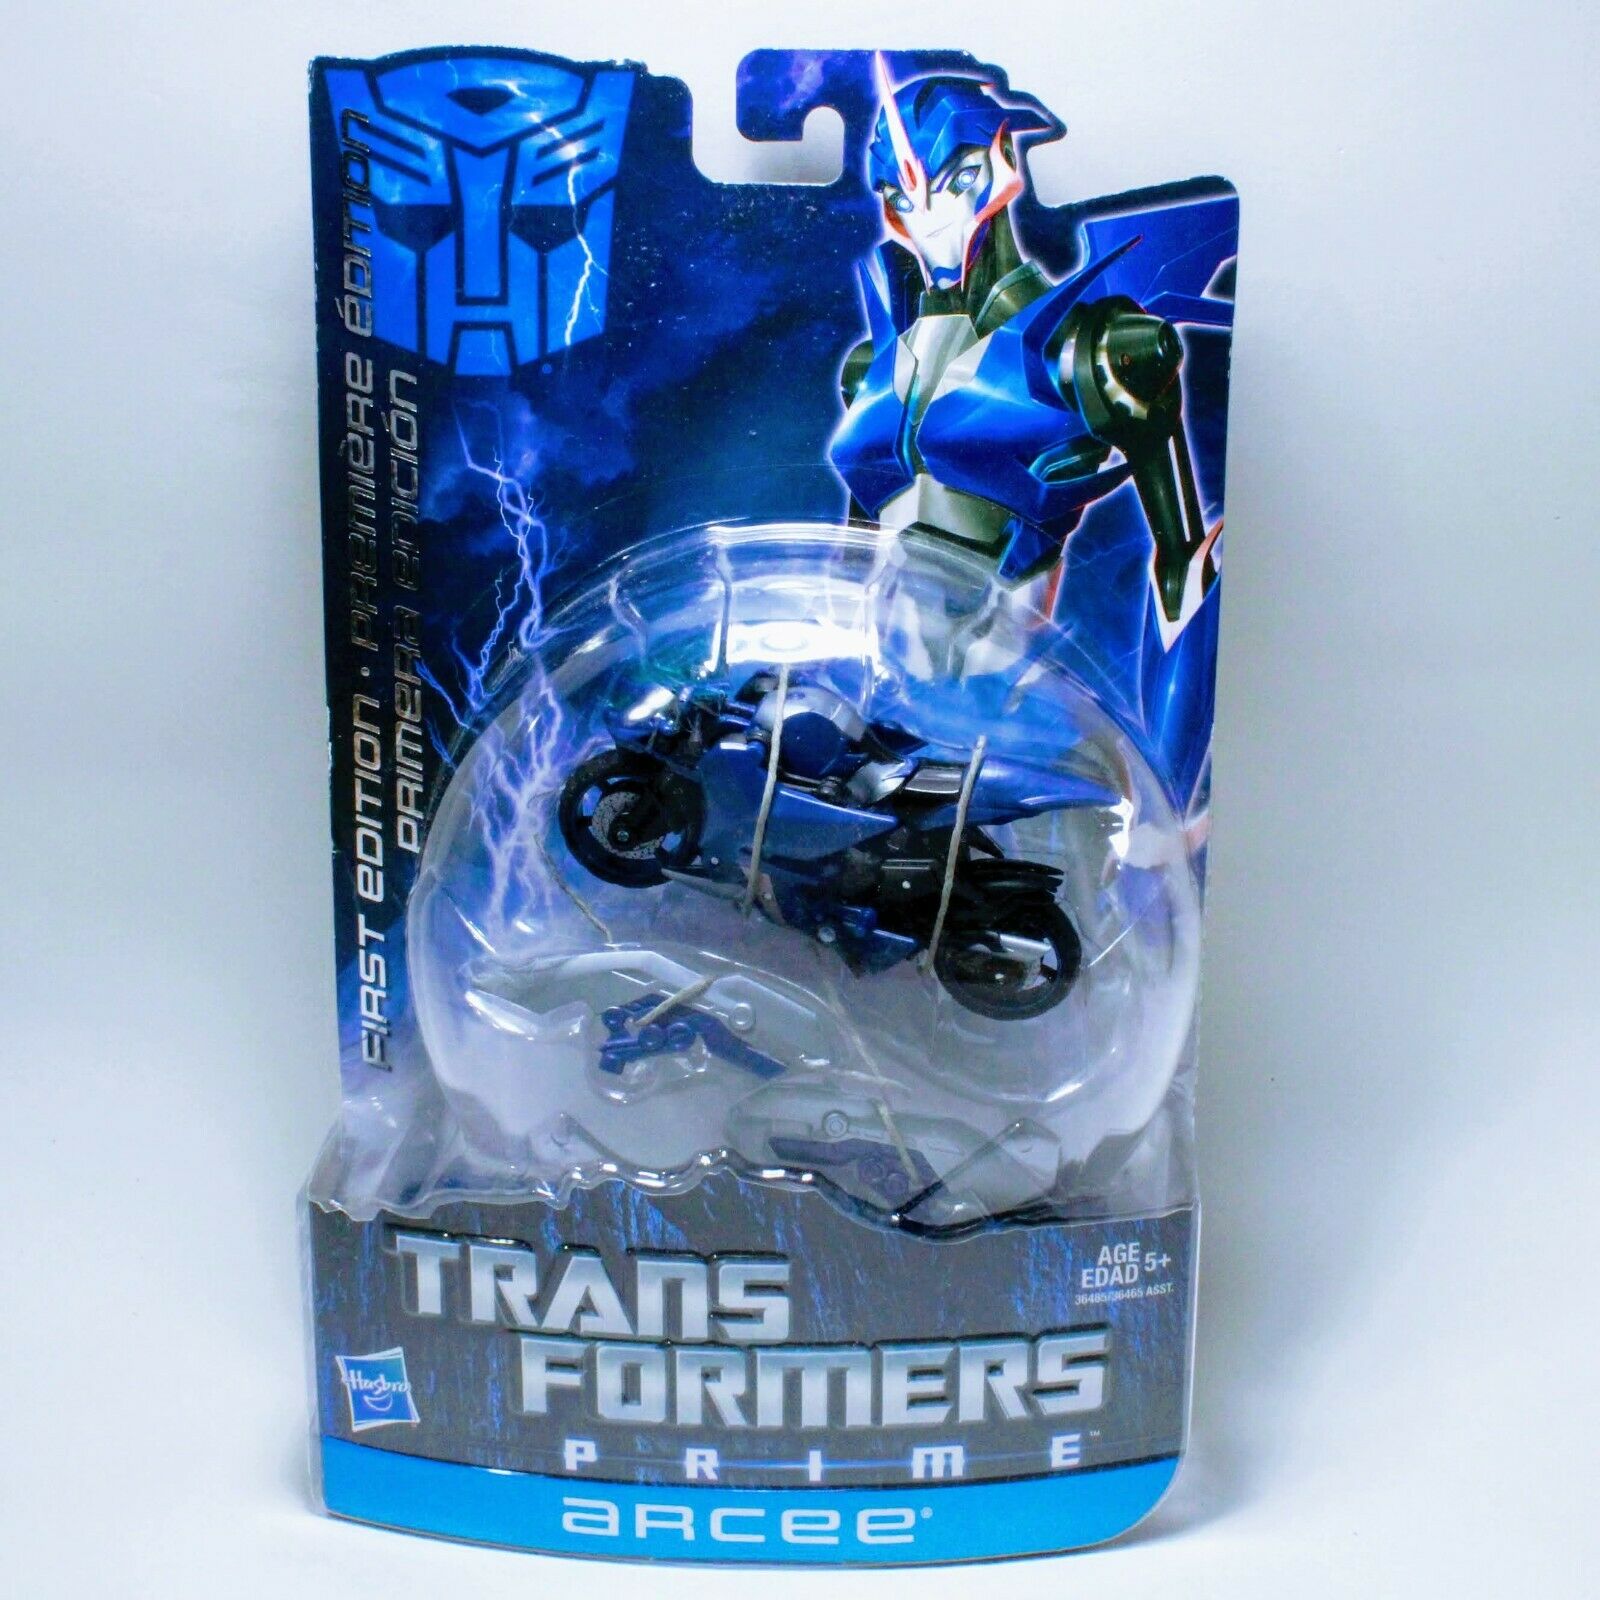 Transformers Prime First Edition Arcee - Autobot Deluxe Class Action Figure